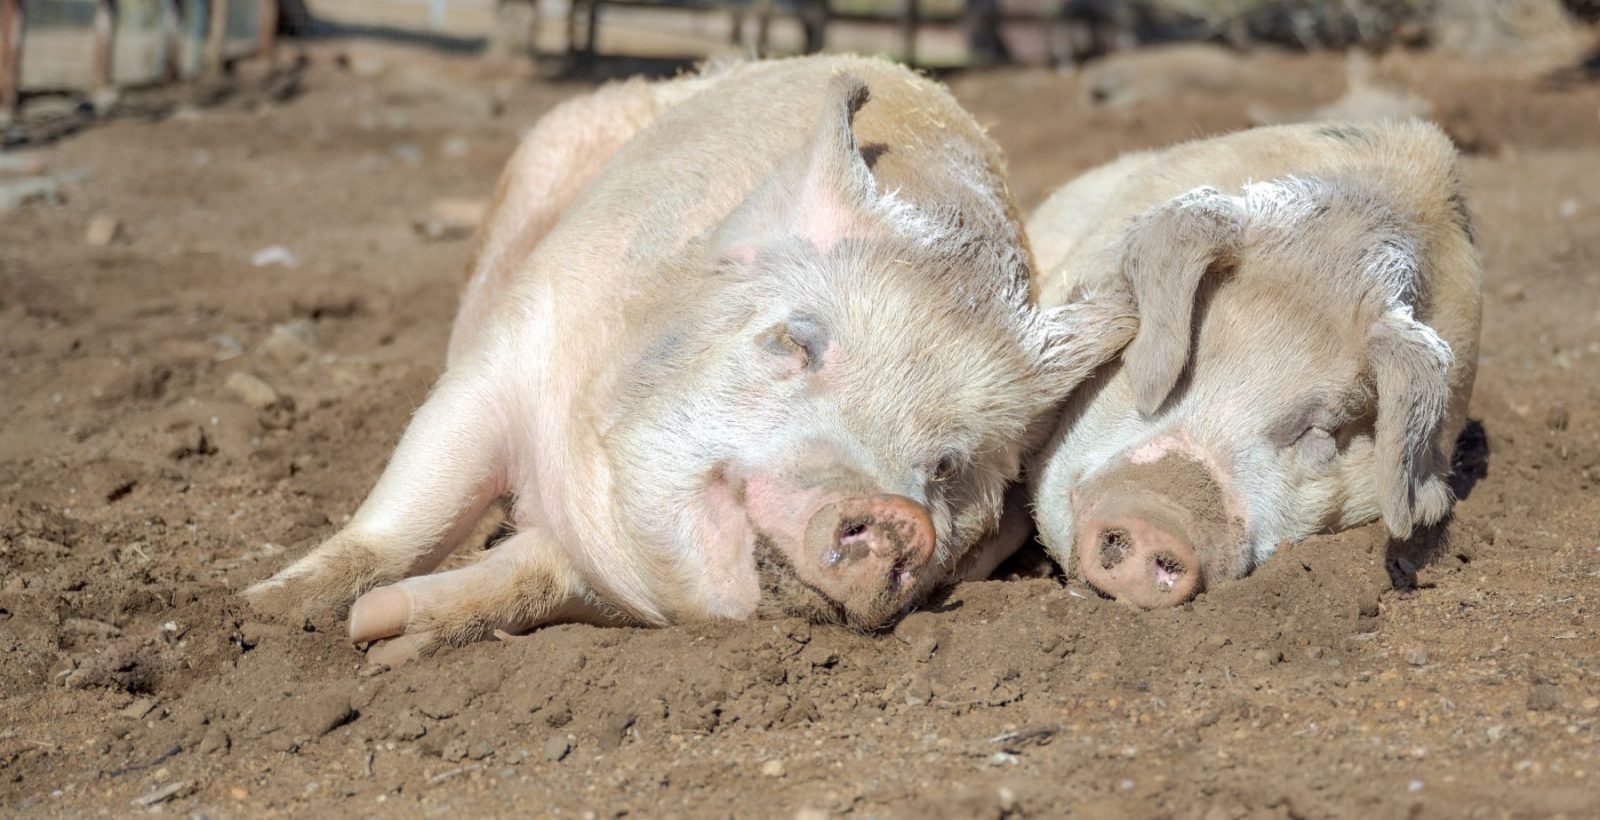 Two pigs snuggling in a dirt pasture